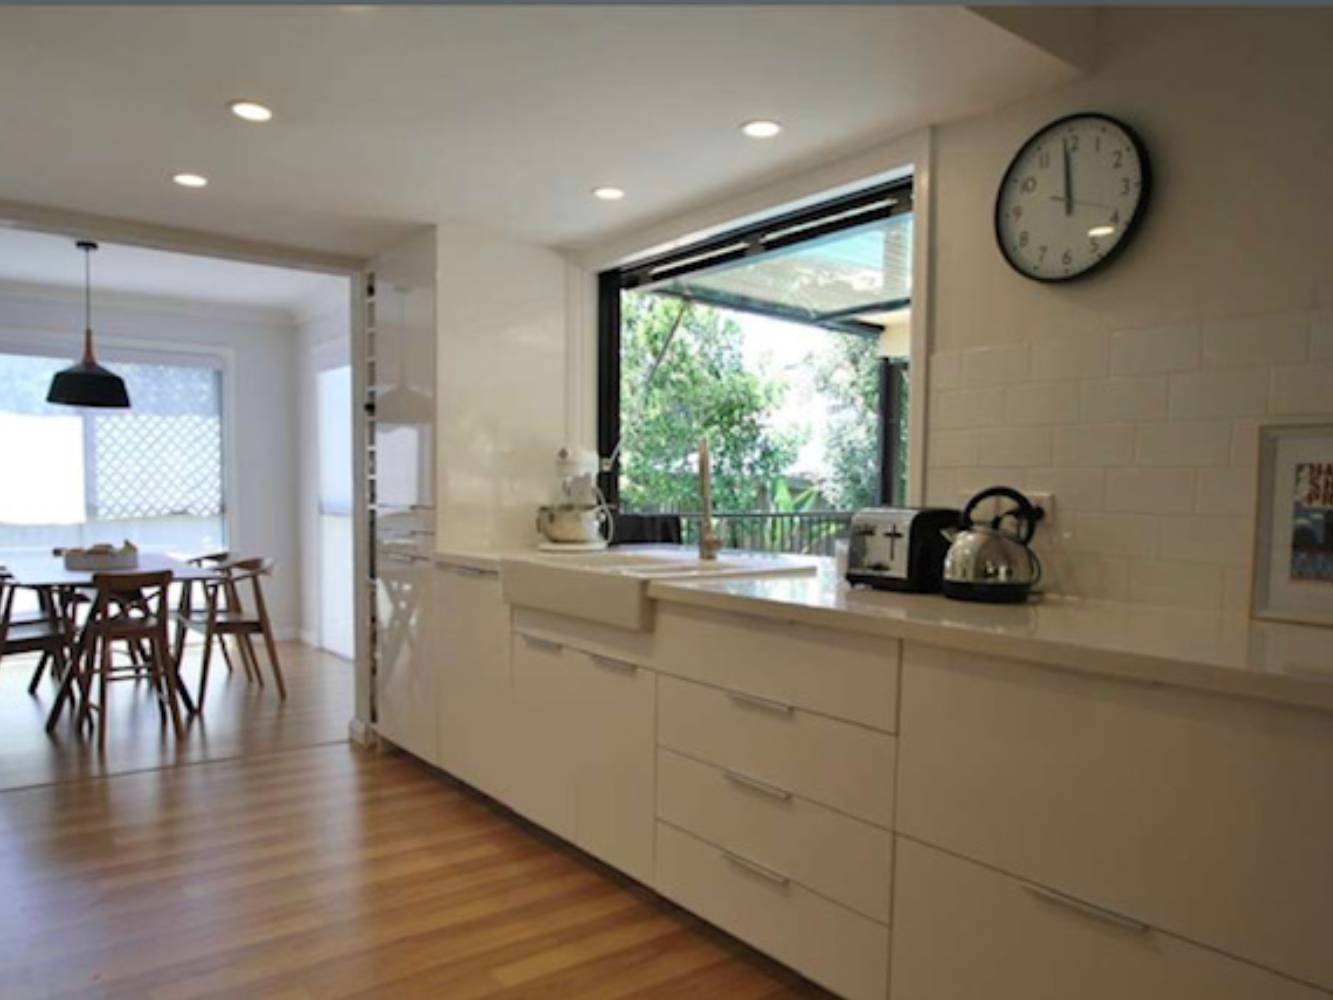 Kitchen benchtop area with hatch window overlooking the pool